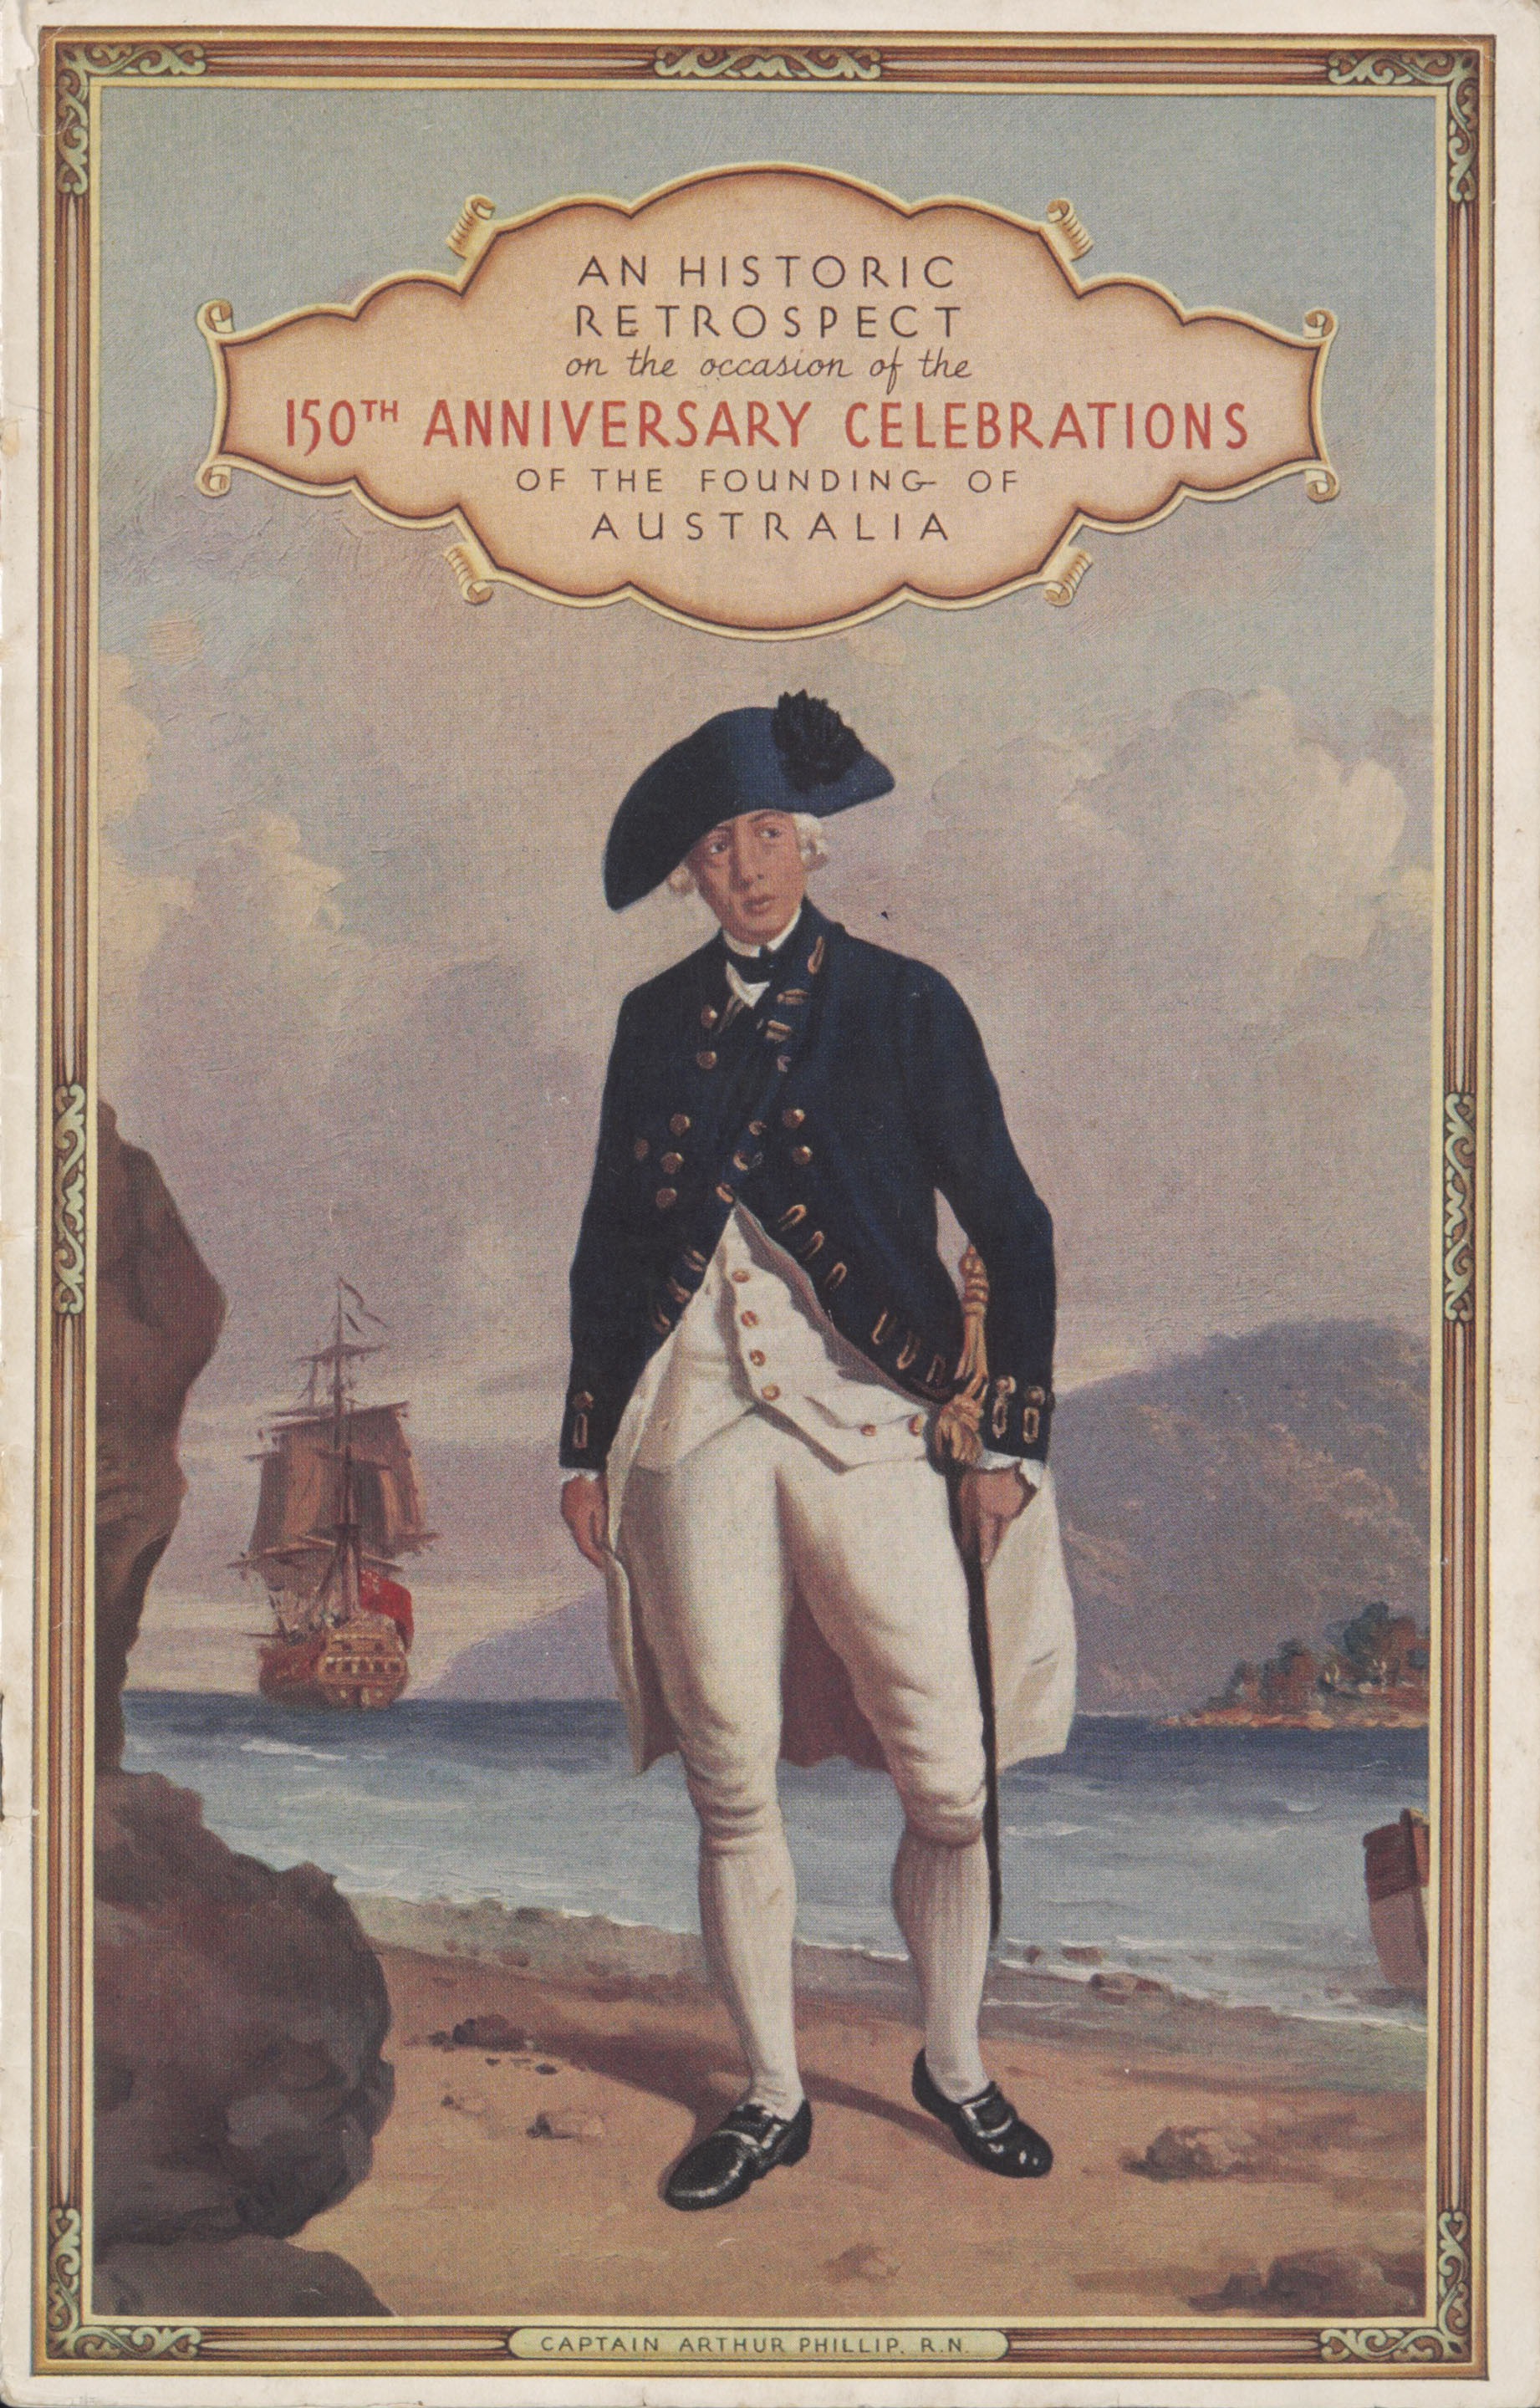 Colour publication printed for the 150th Anniversary Celebrations of Australia, 1938. Captain Arthur Phillip is featured.